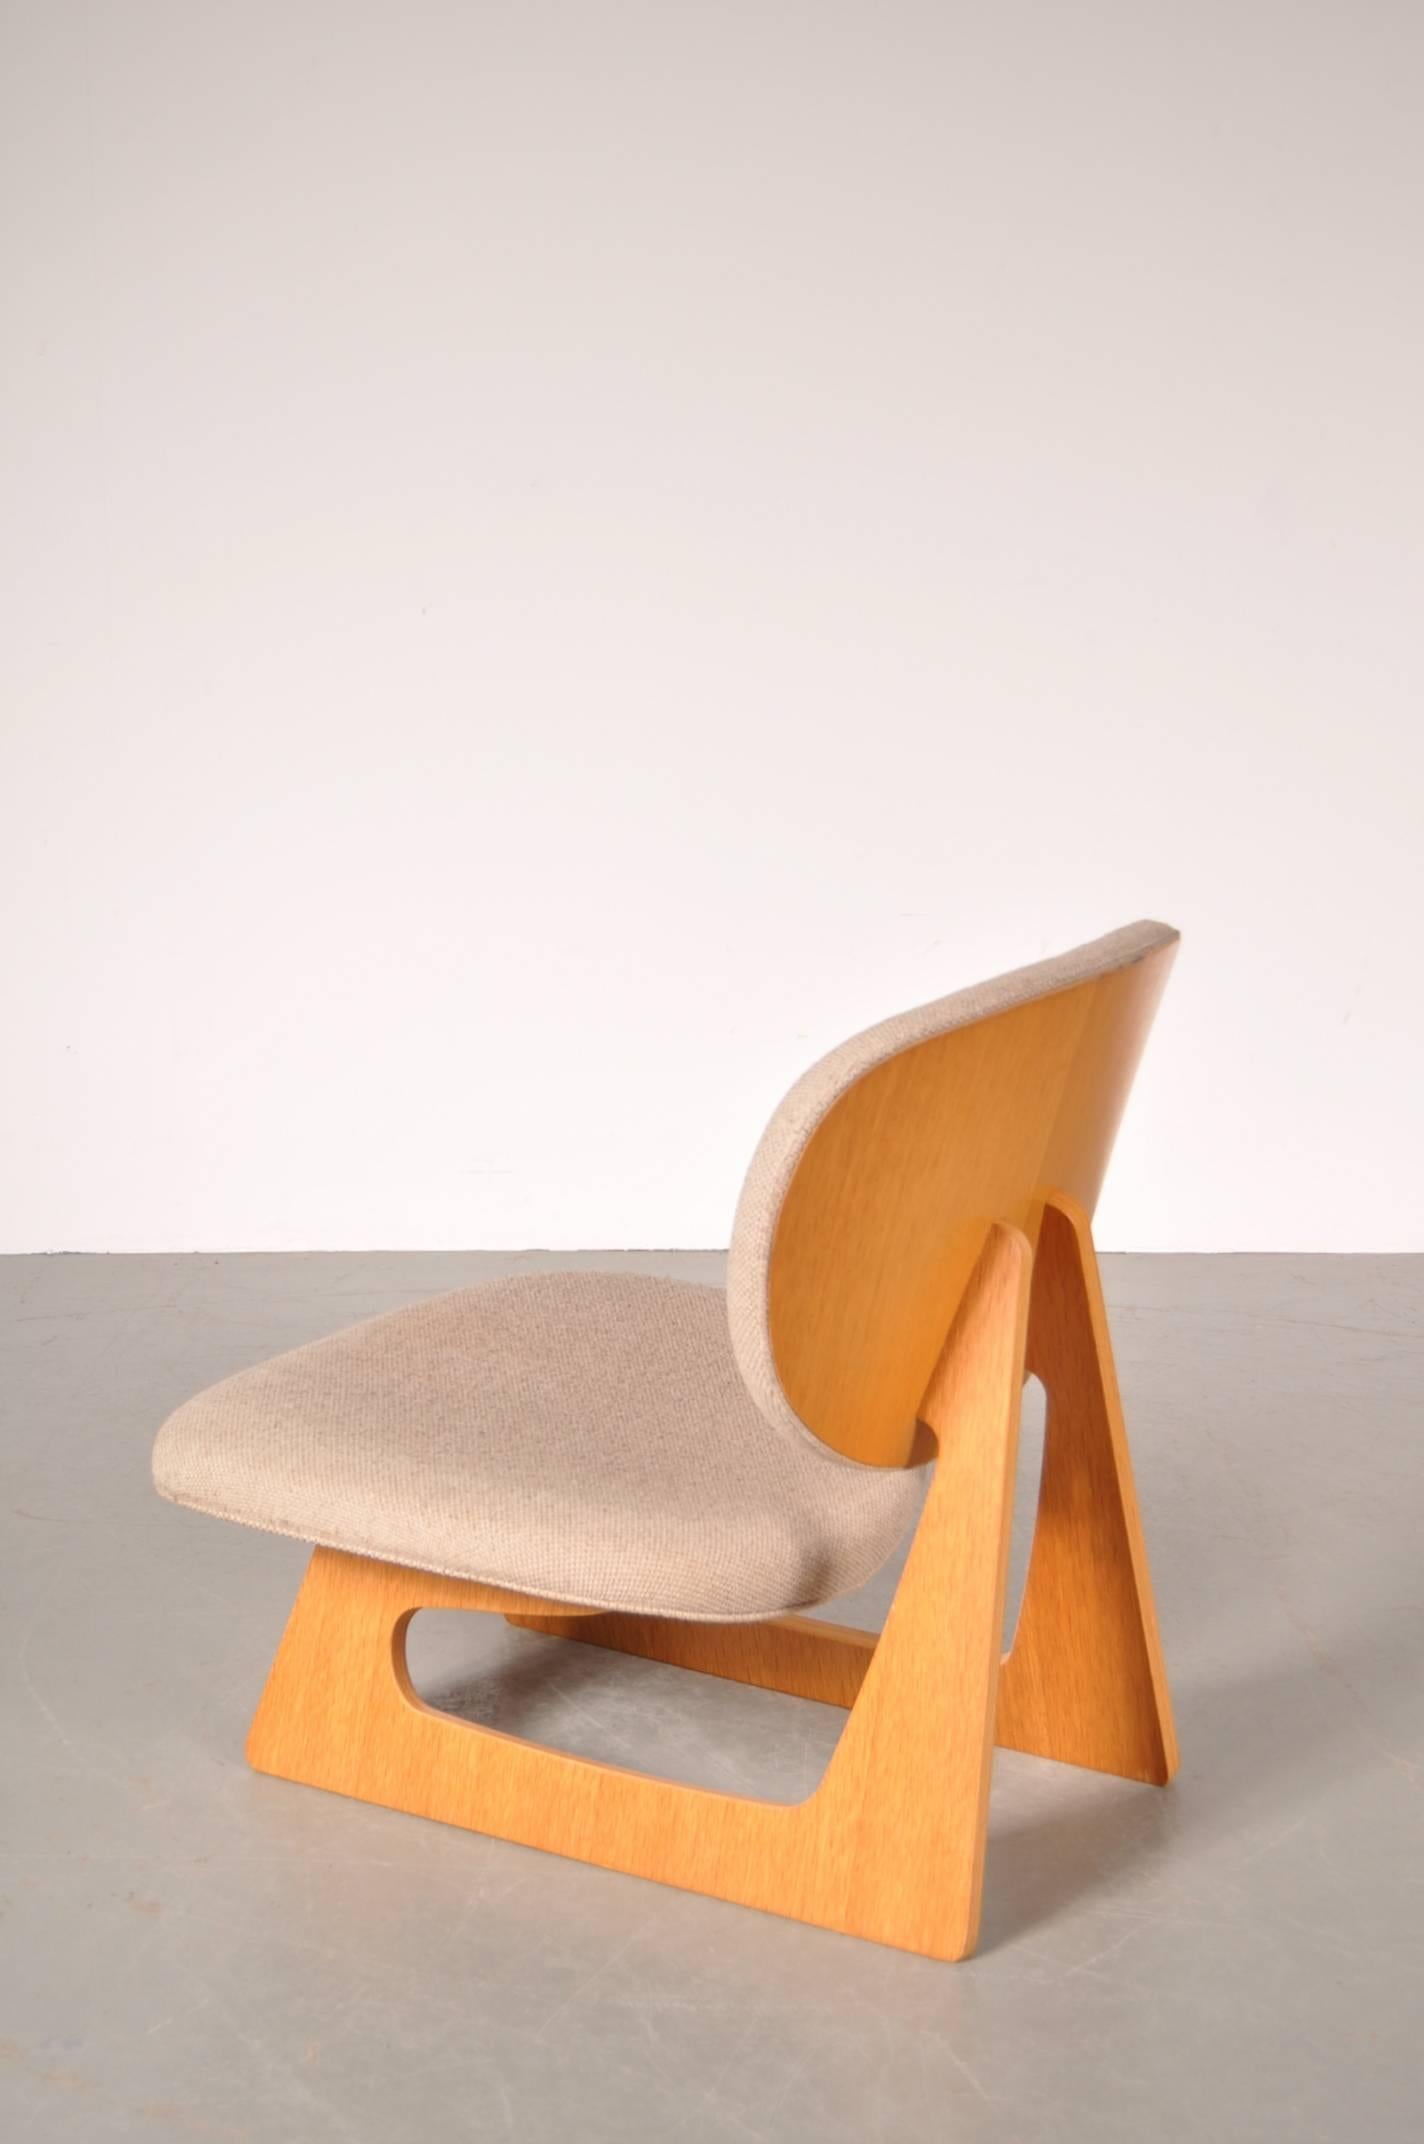 Eye-catching Teiza chair designed by Daisaku Choh, manufactured by Tendo in Japan in 1960.

This chair was designed for the Japanese exhibition booth at the 12th Milano Triennale in 1960. It is the most representative chair of Choh’s design. At